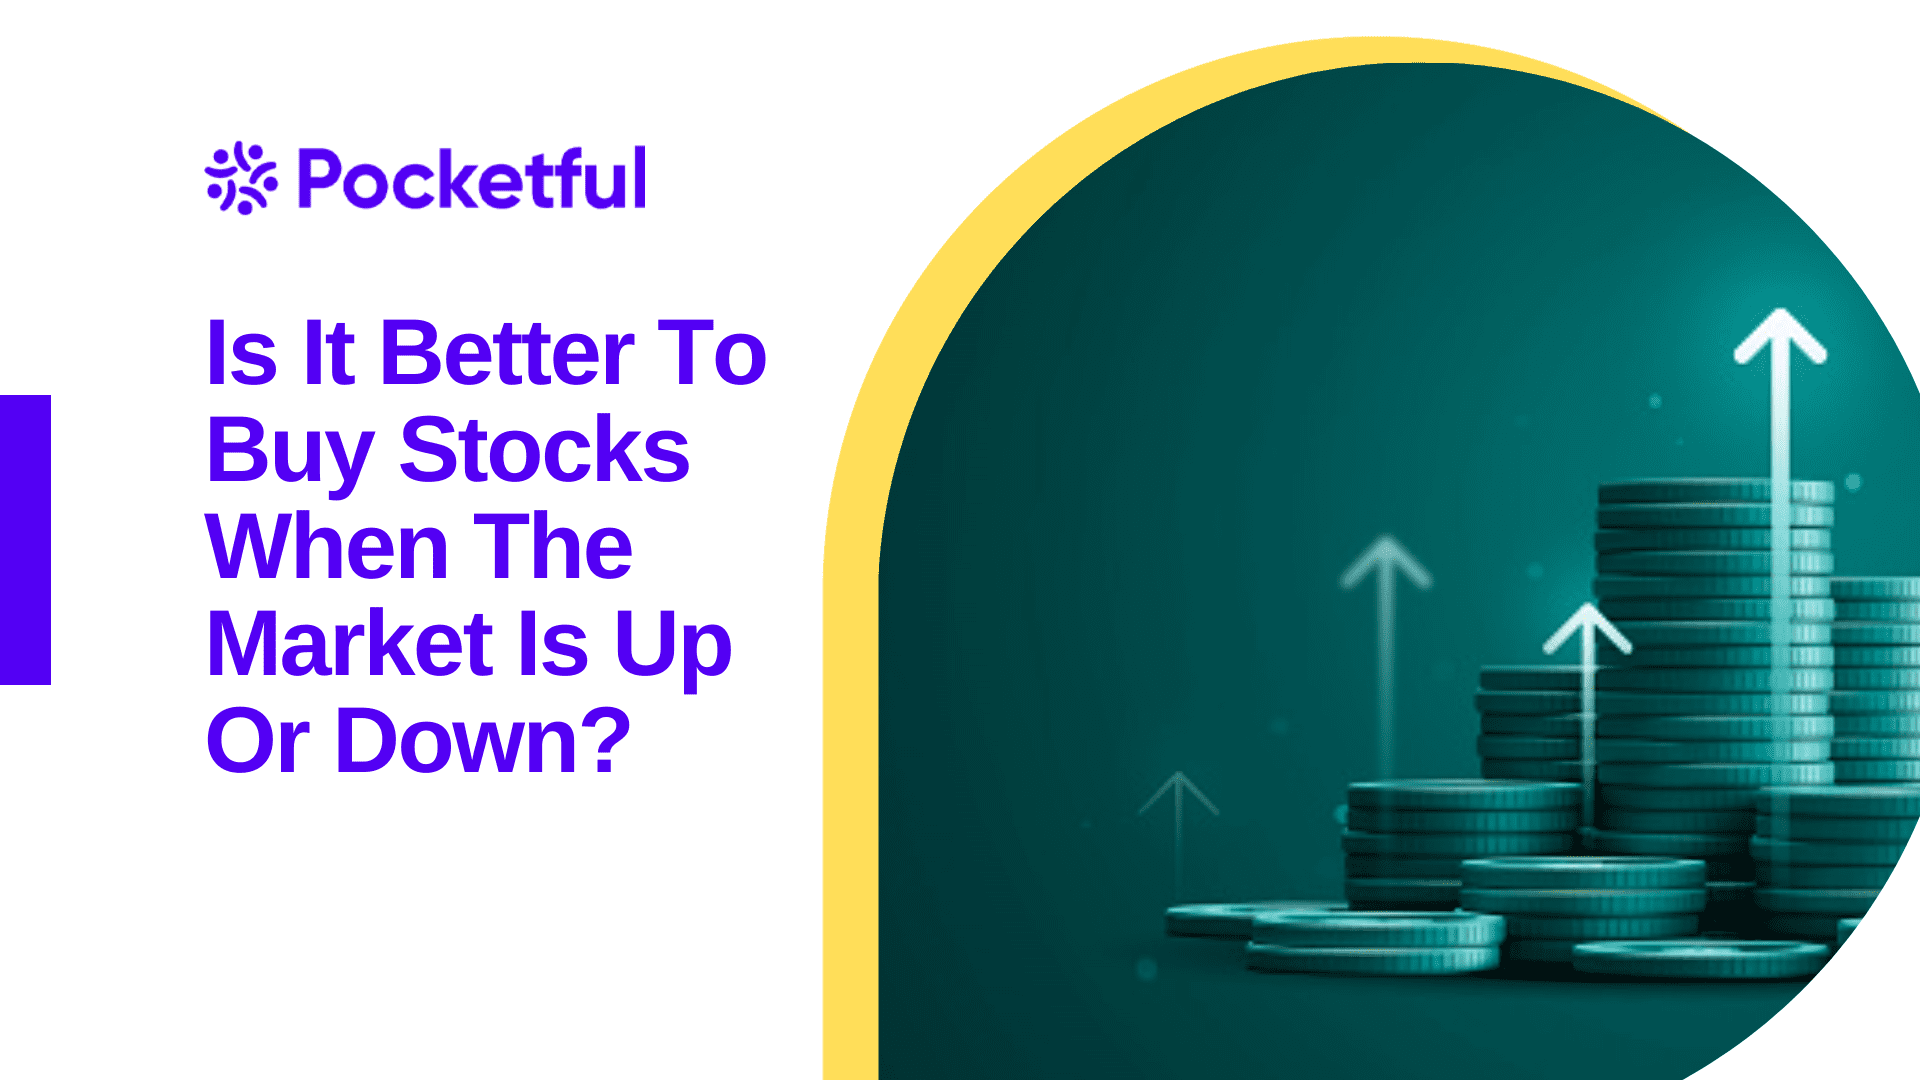 Is It Better To Buy Stocks When The Market Is Up Or Down?